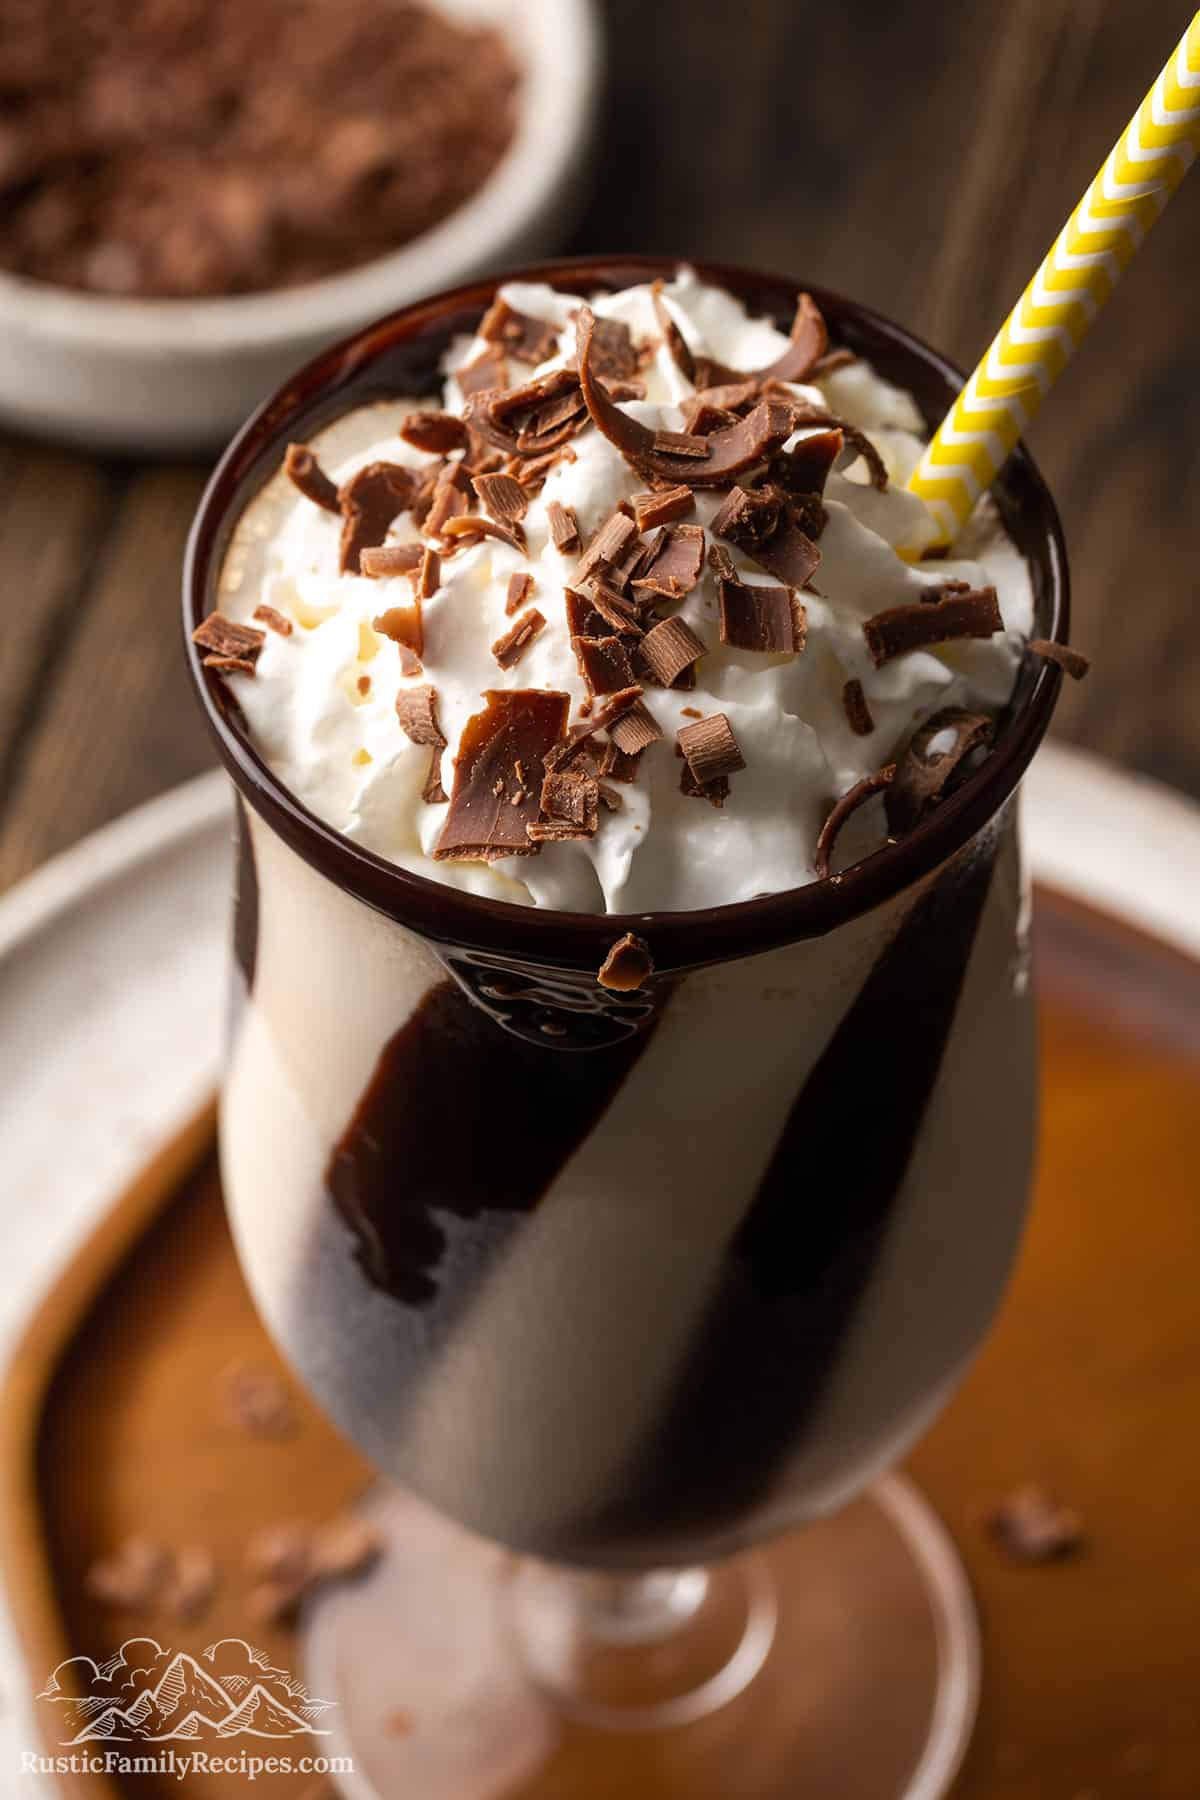 A mudslide drink with chocolate shavings on top